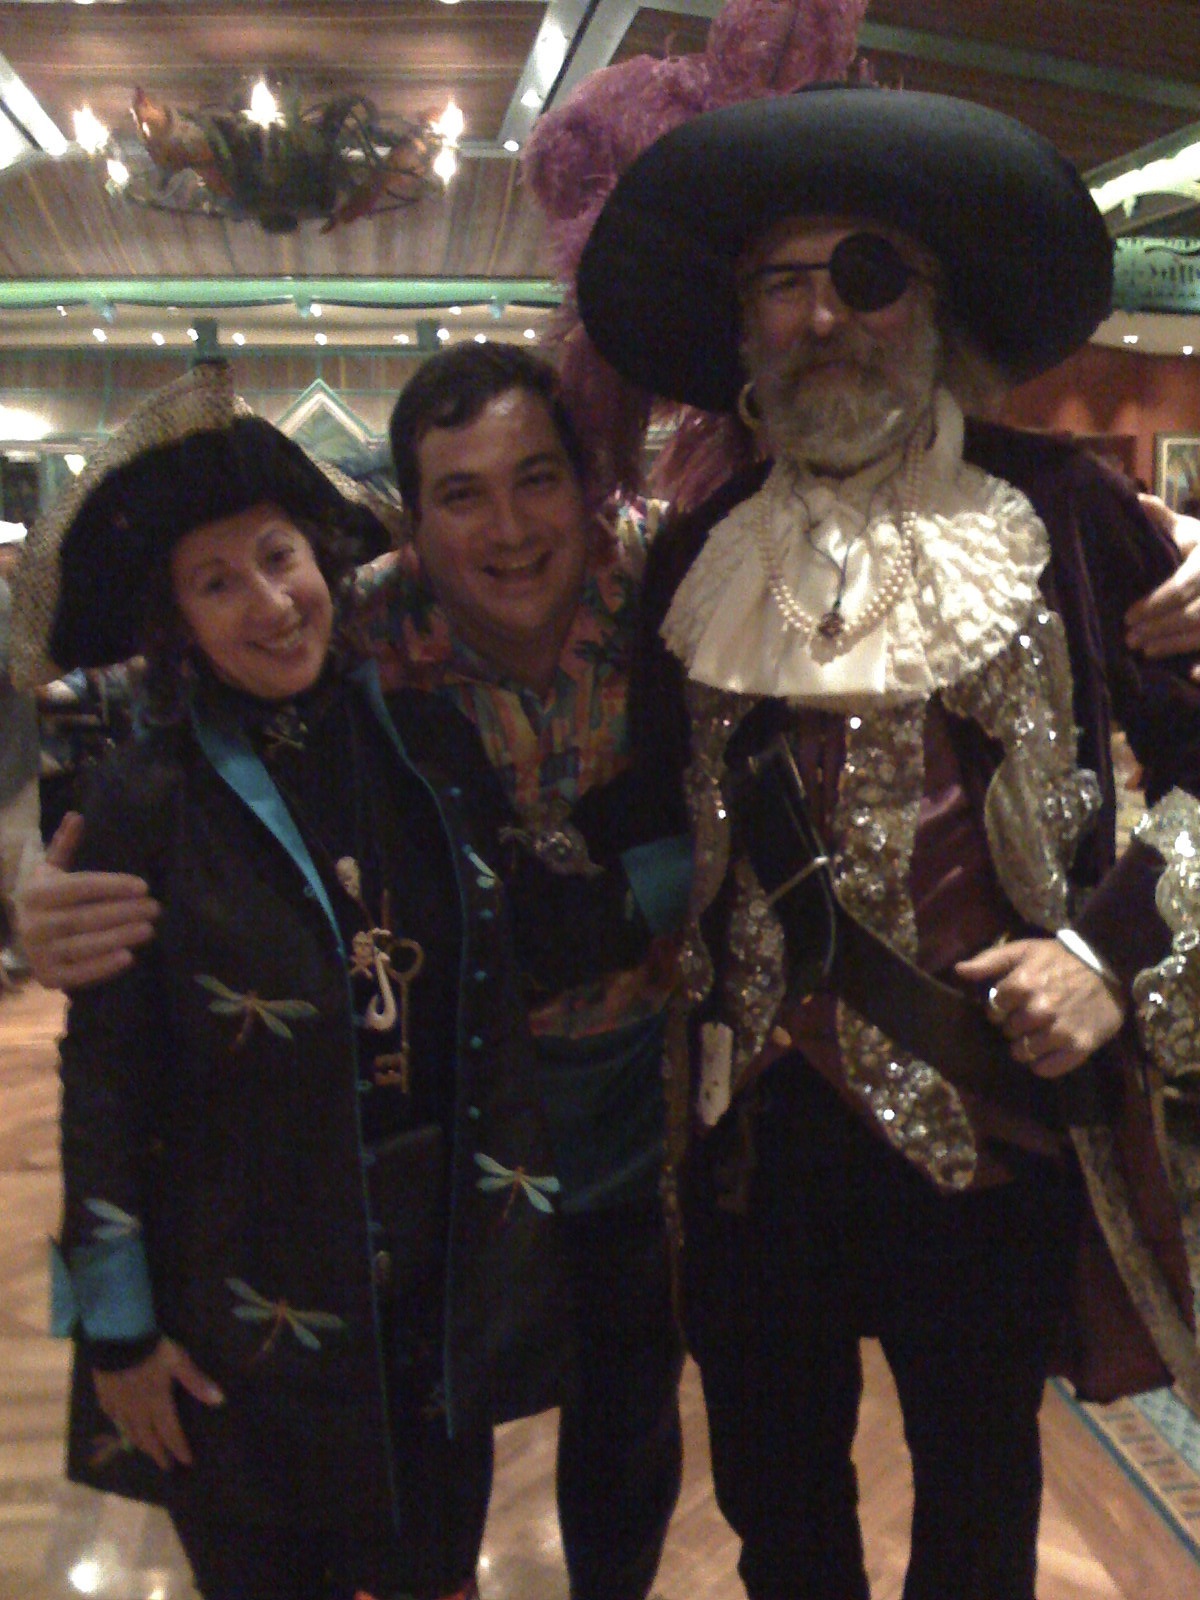 Kerul and Dave as pirates on a Disney cruise